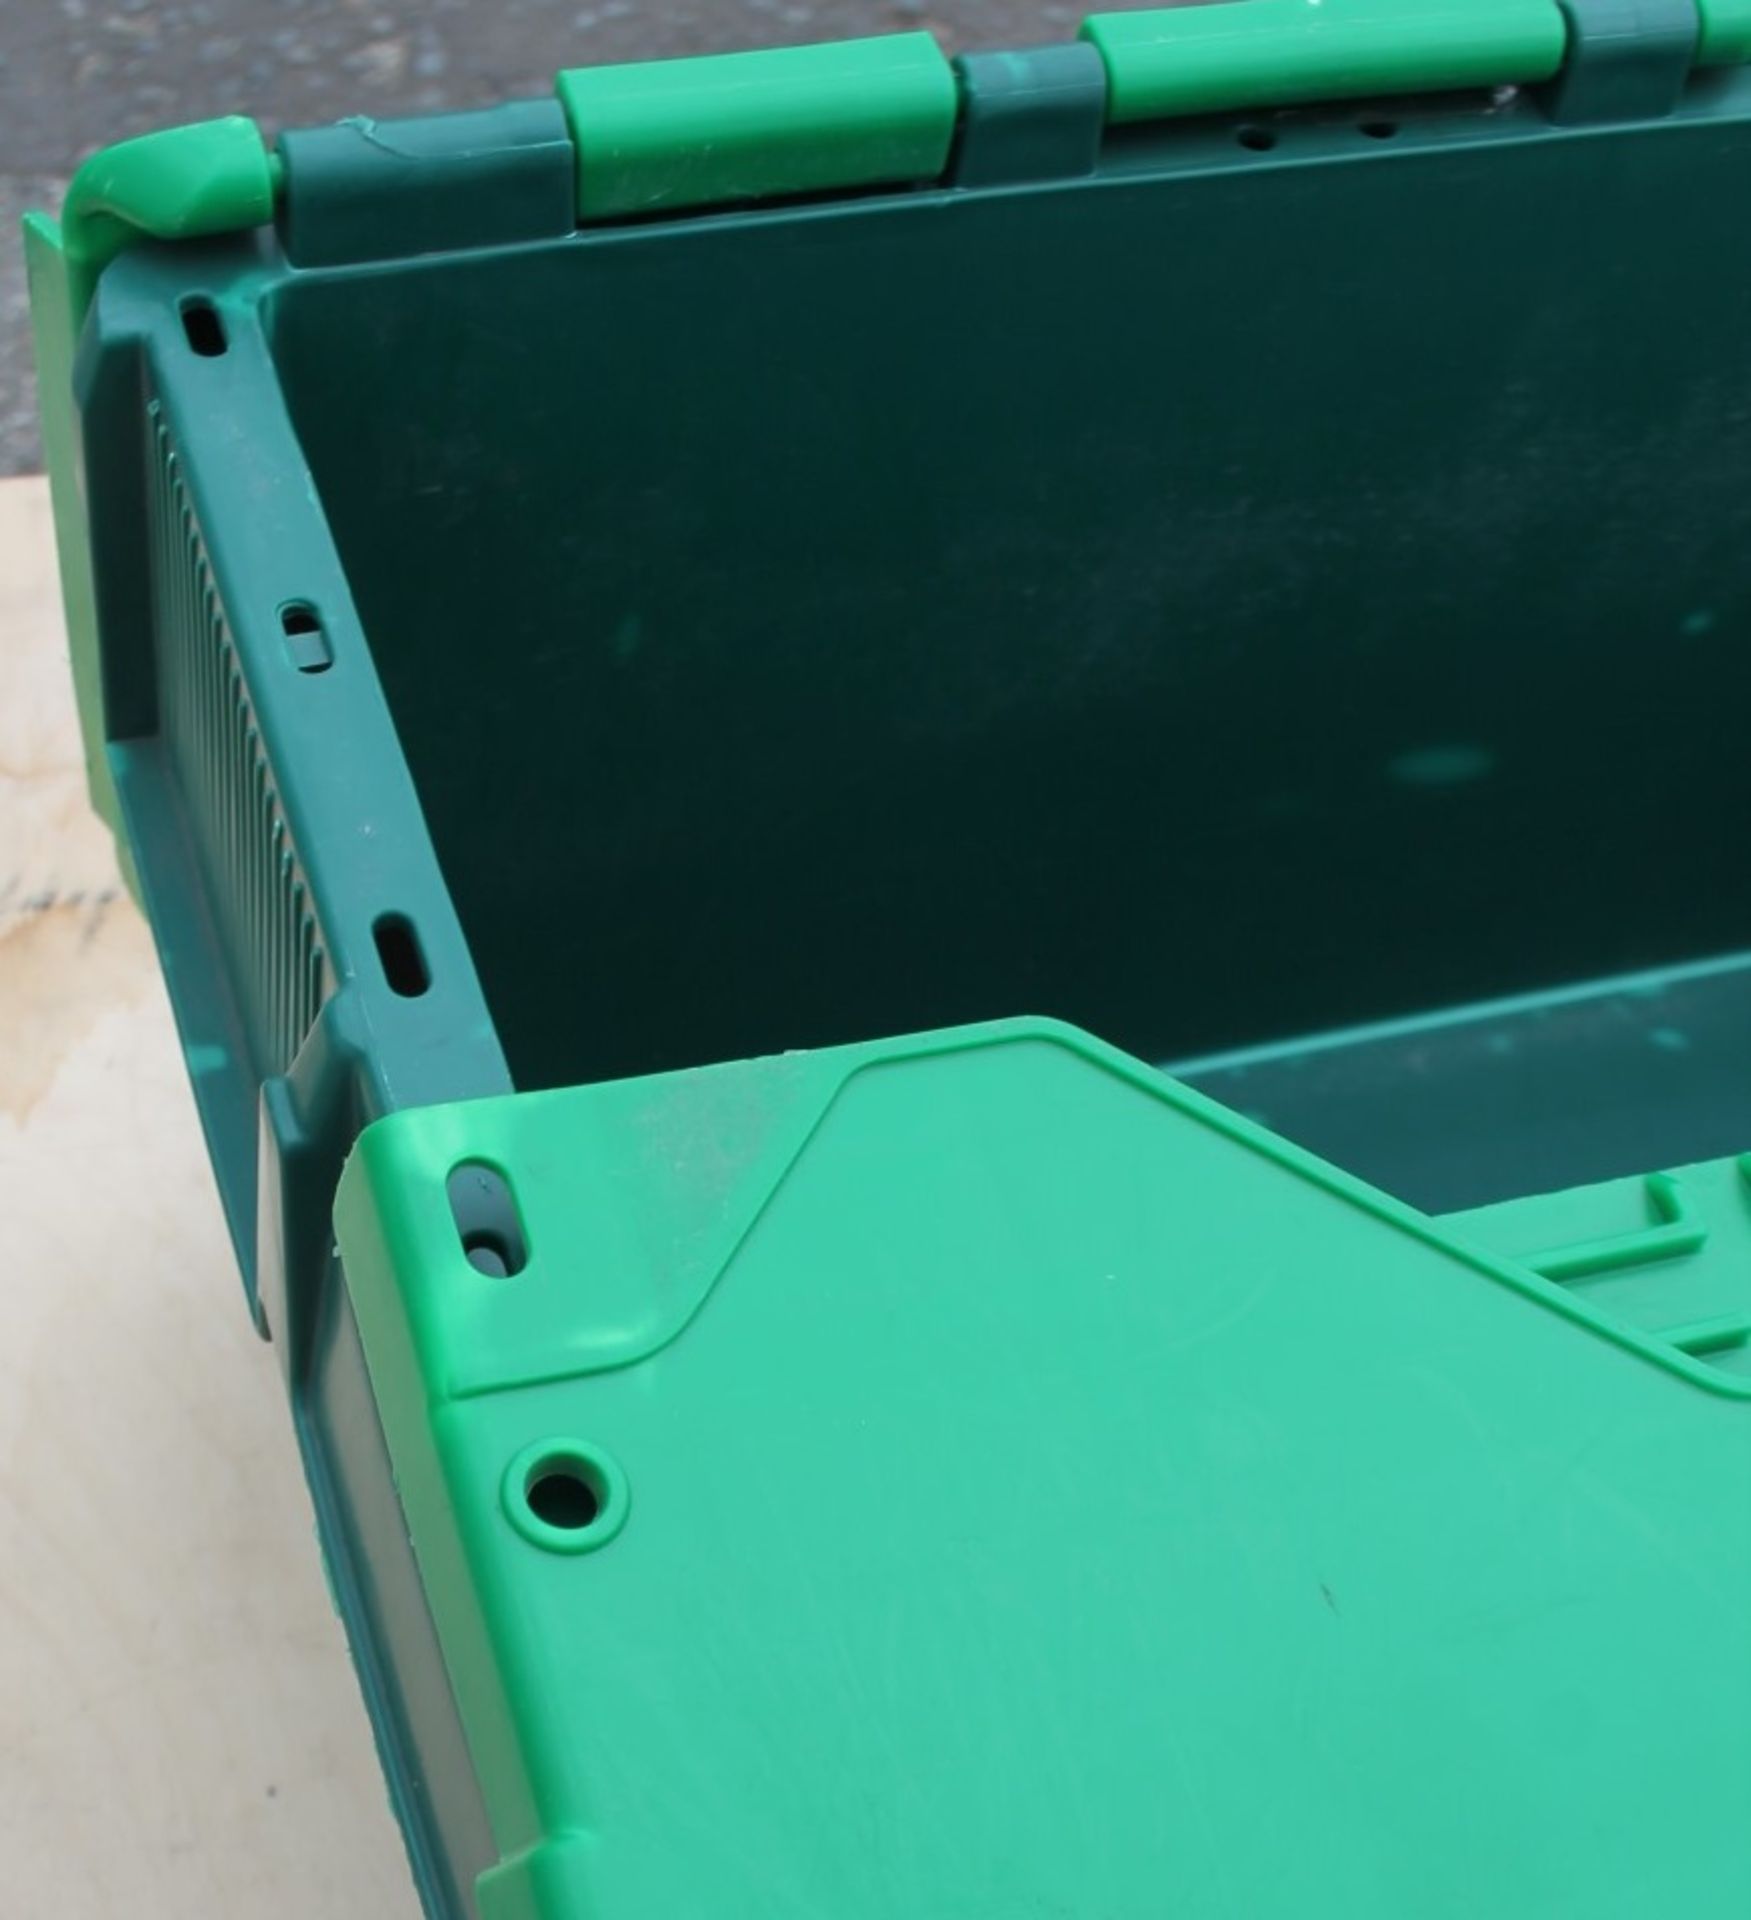 20 x Robust Low Profile Green Plastic Secure Storage Boxes With Attached Hinged Lids - Dimensions: - Image 3 of 5